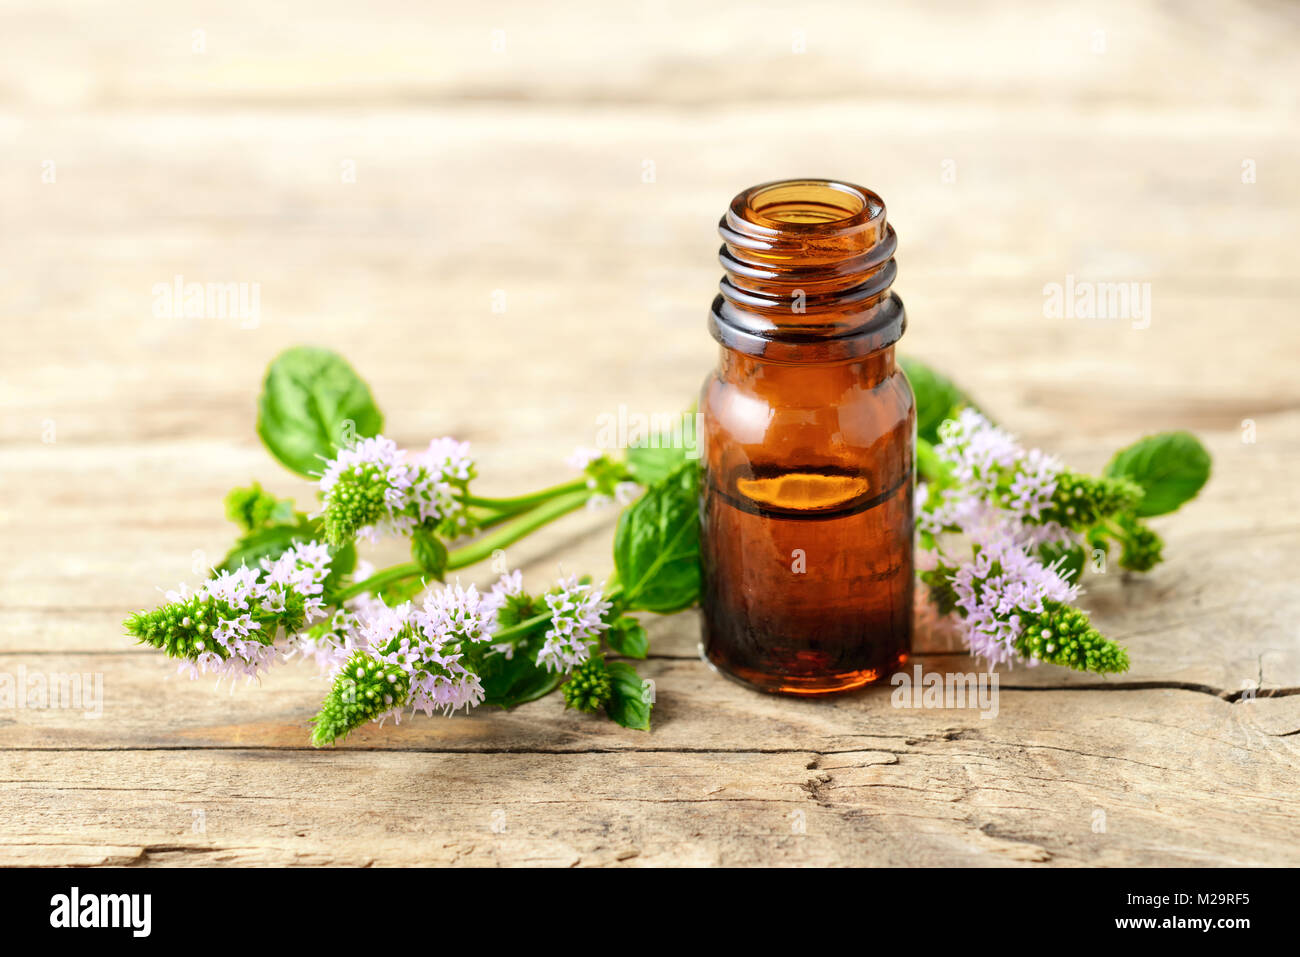 Peppermint essential oil and peppermint flowers on the wooden board Stock Photo